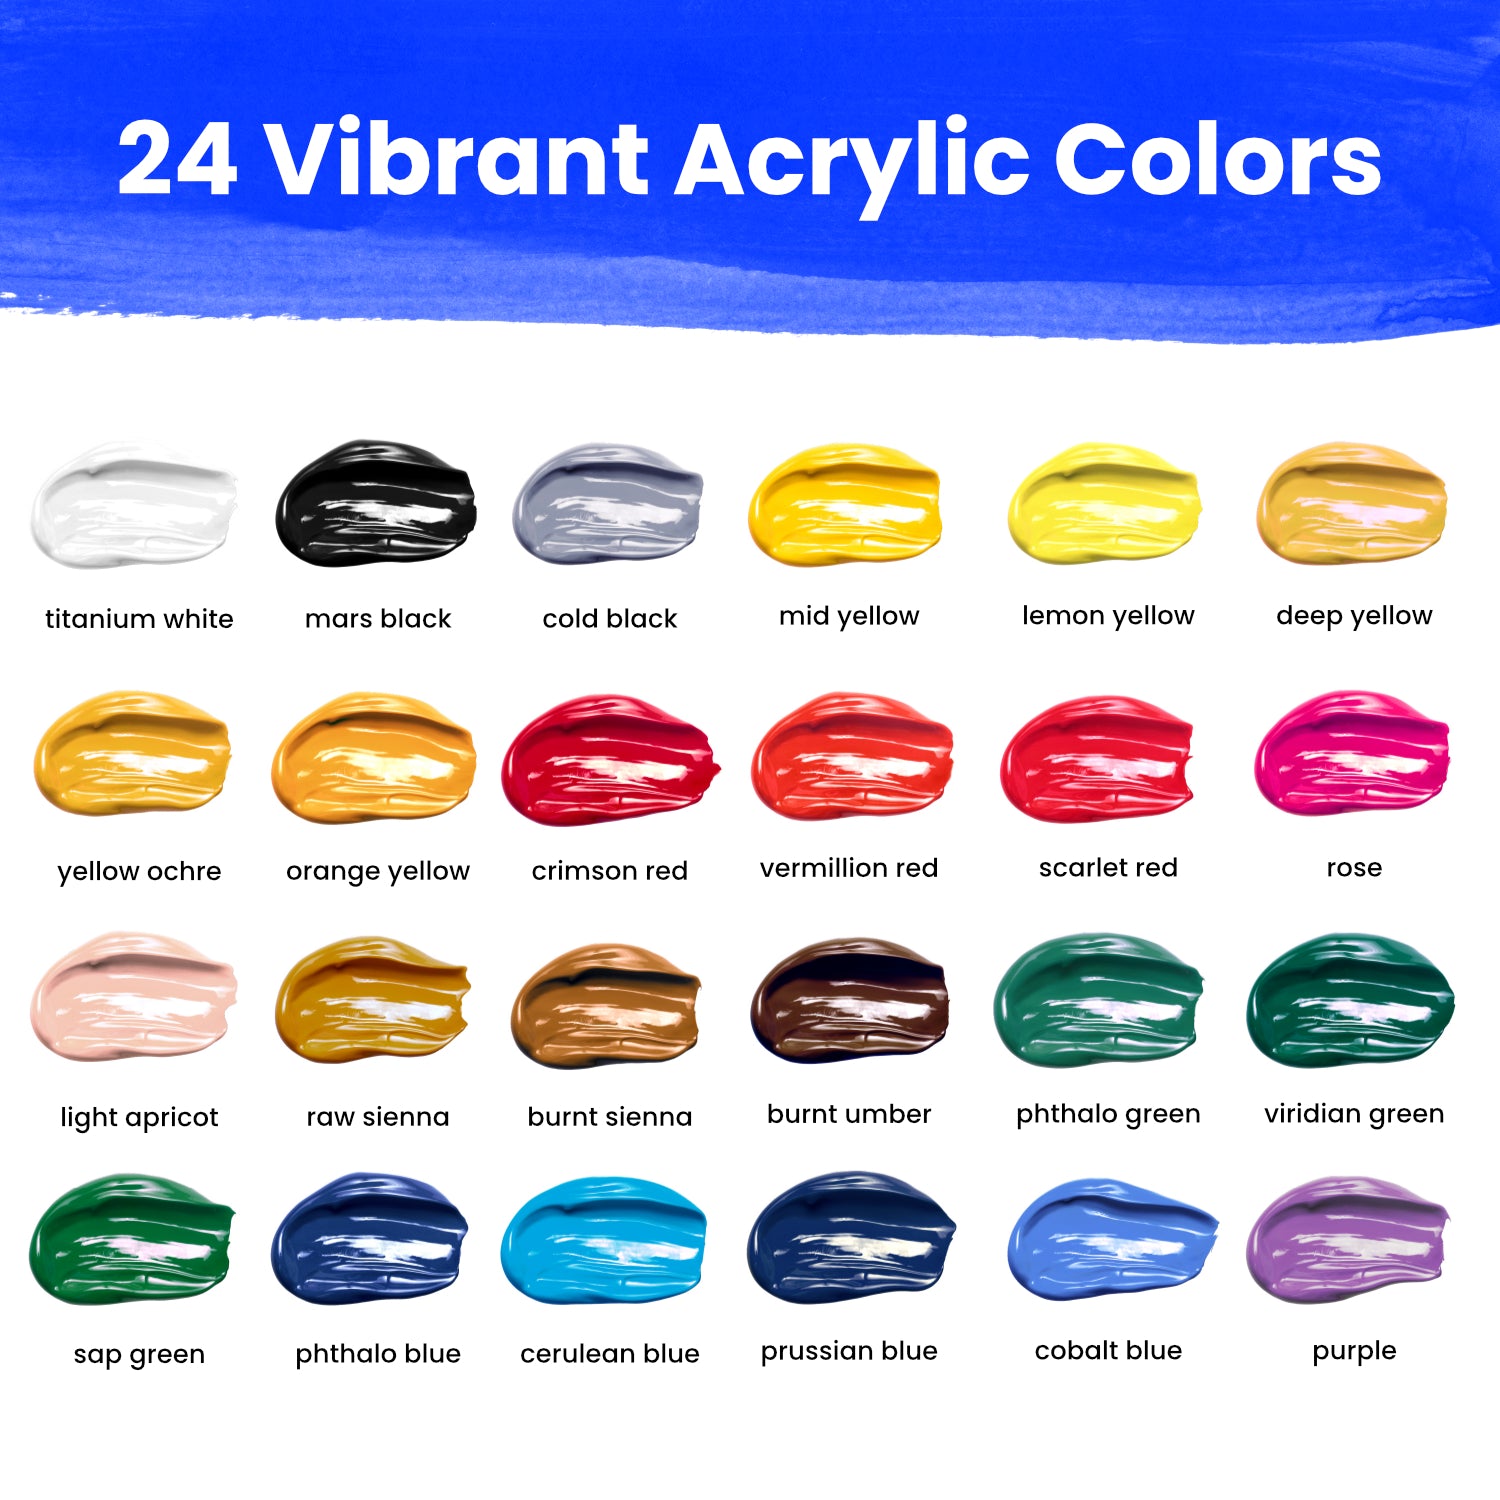 Acrylic Value Sets - The Art Store/Commercial Art Supply